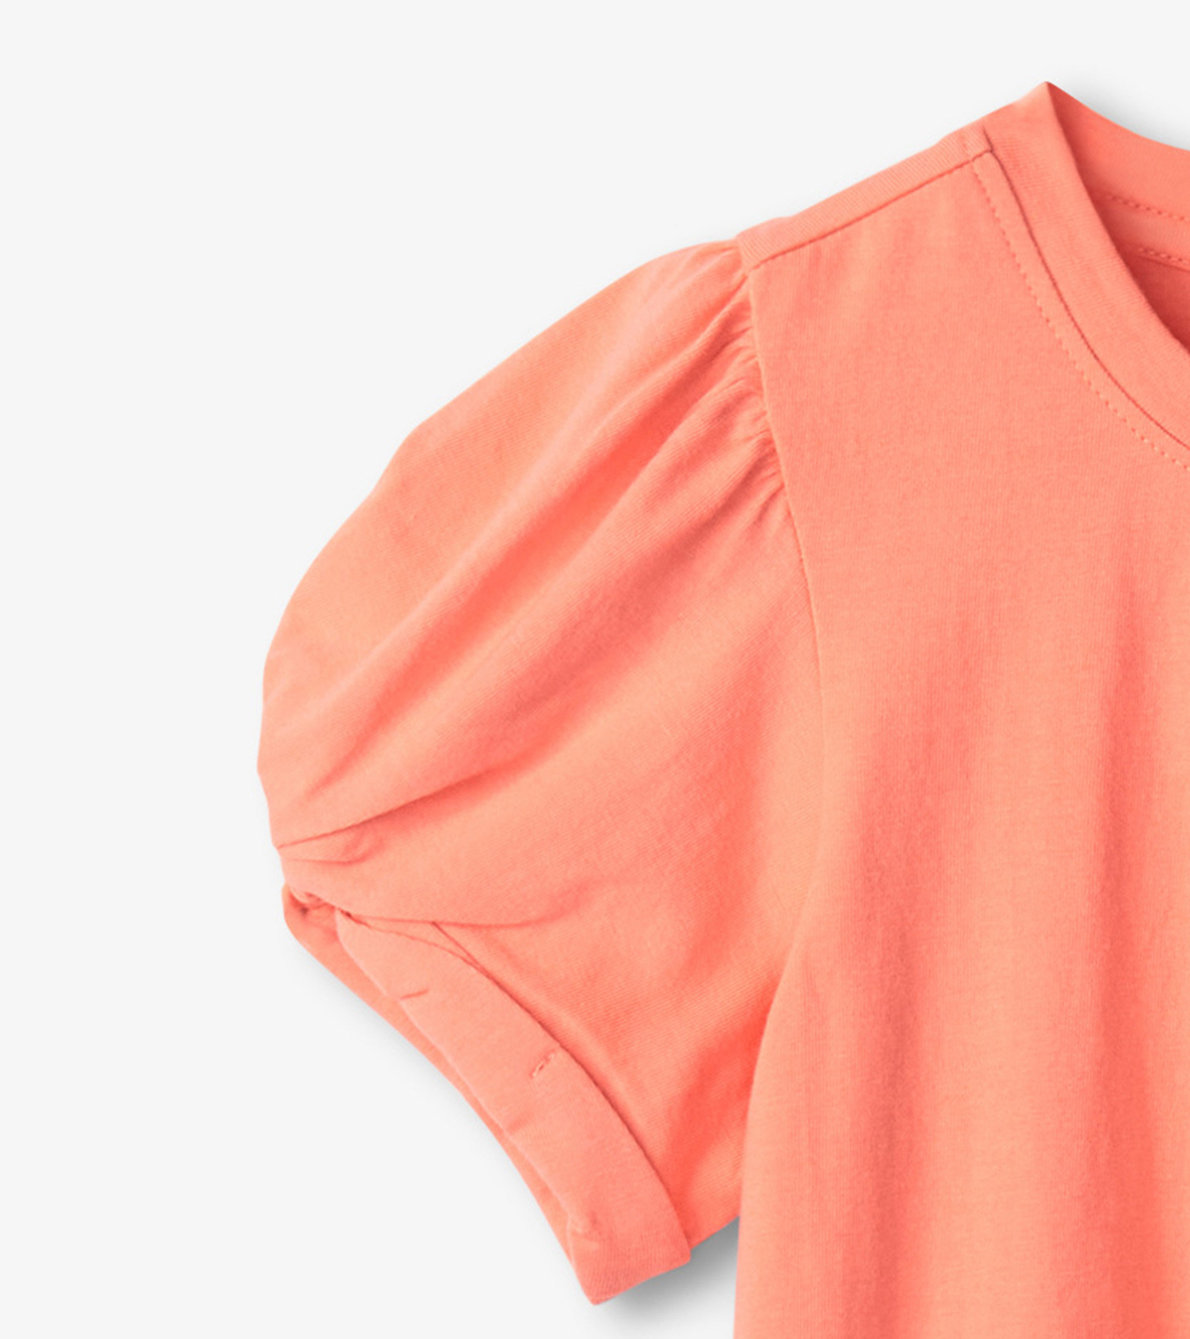 View larger image of Girls Coral Twisted Sleeve Tee